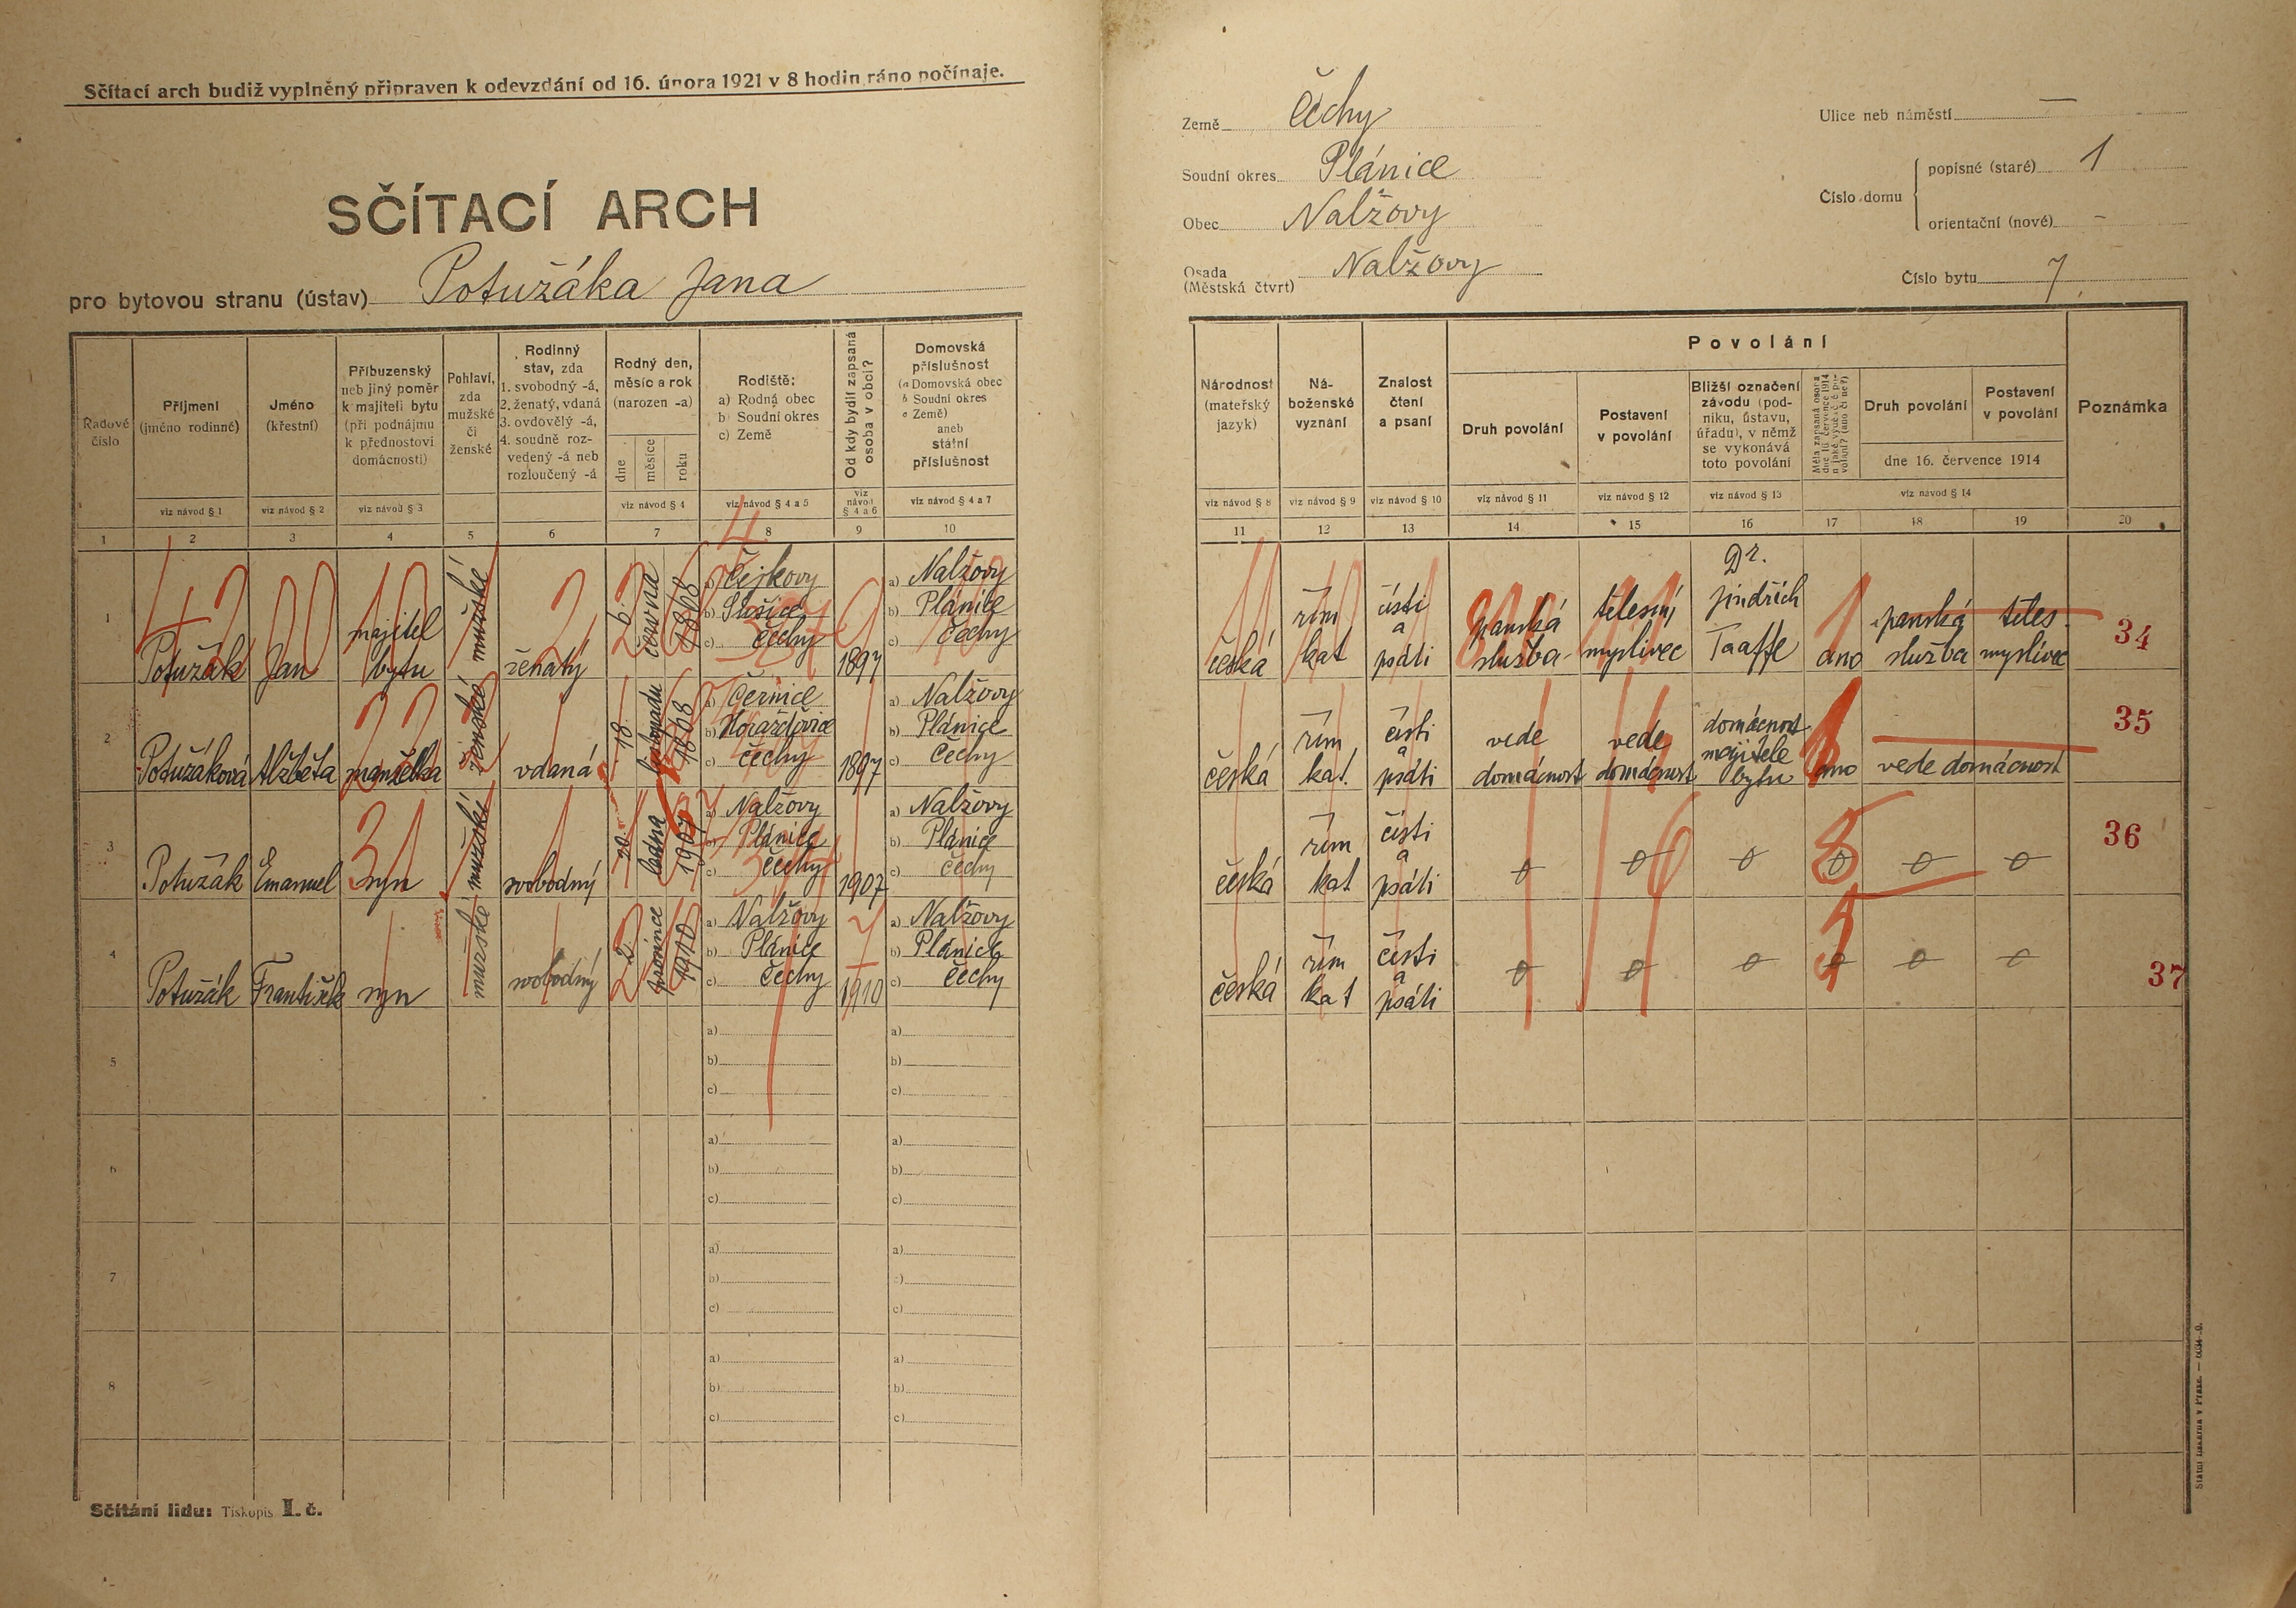 15. soap-kt_01159_census-1921-nalzovy-cp001_0150